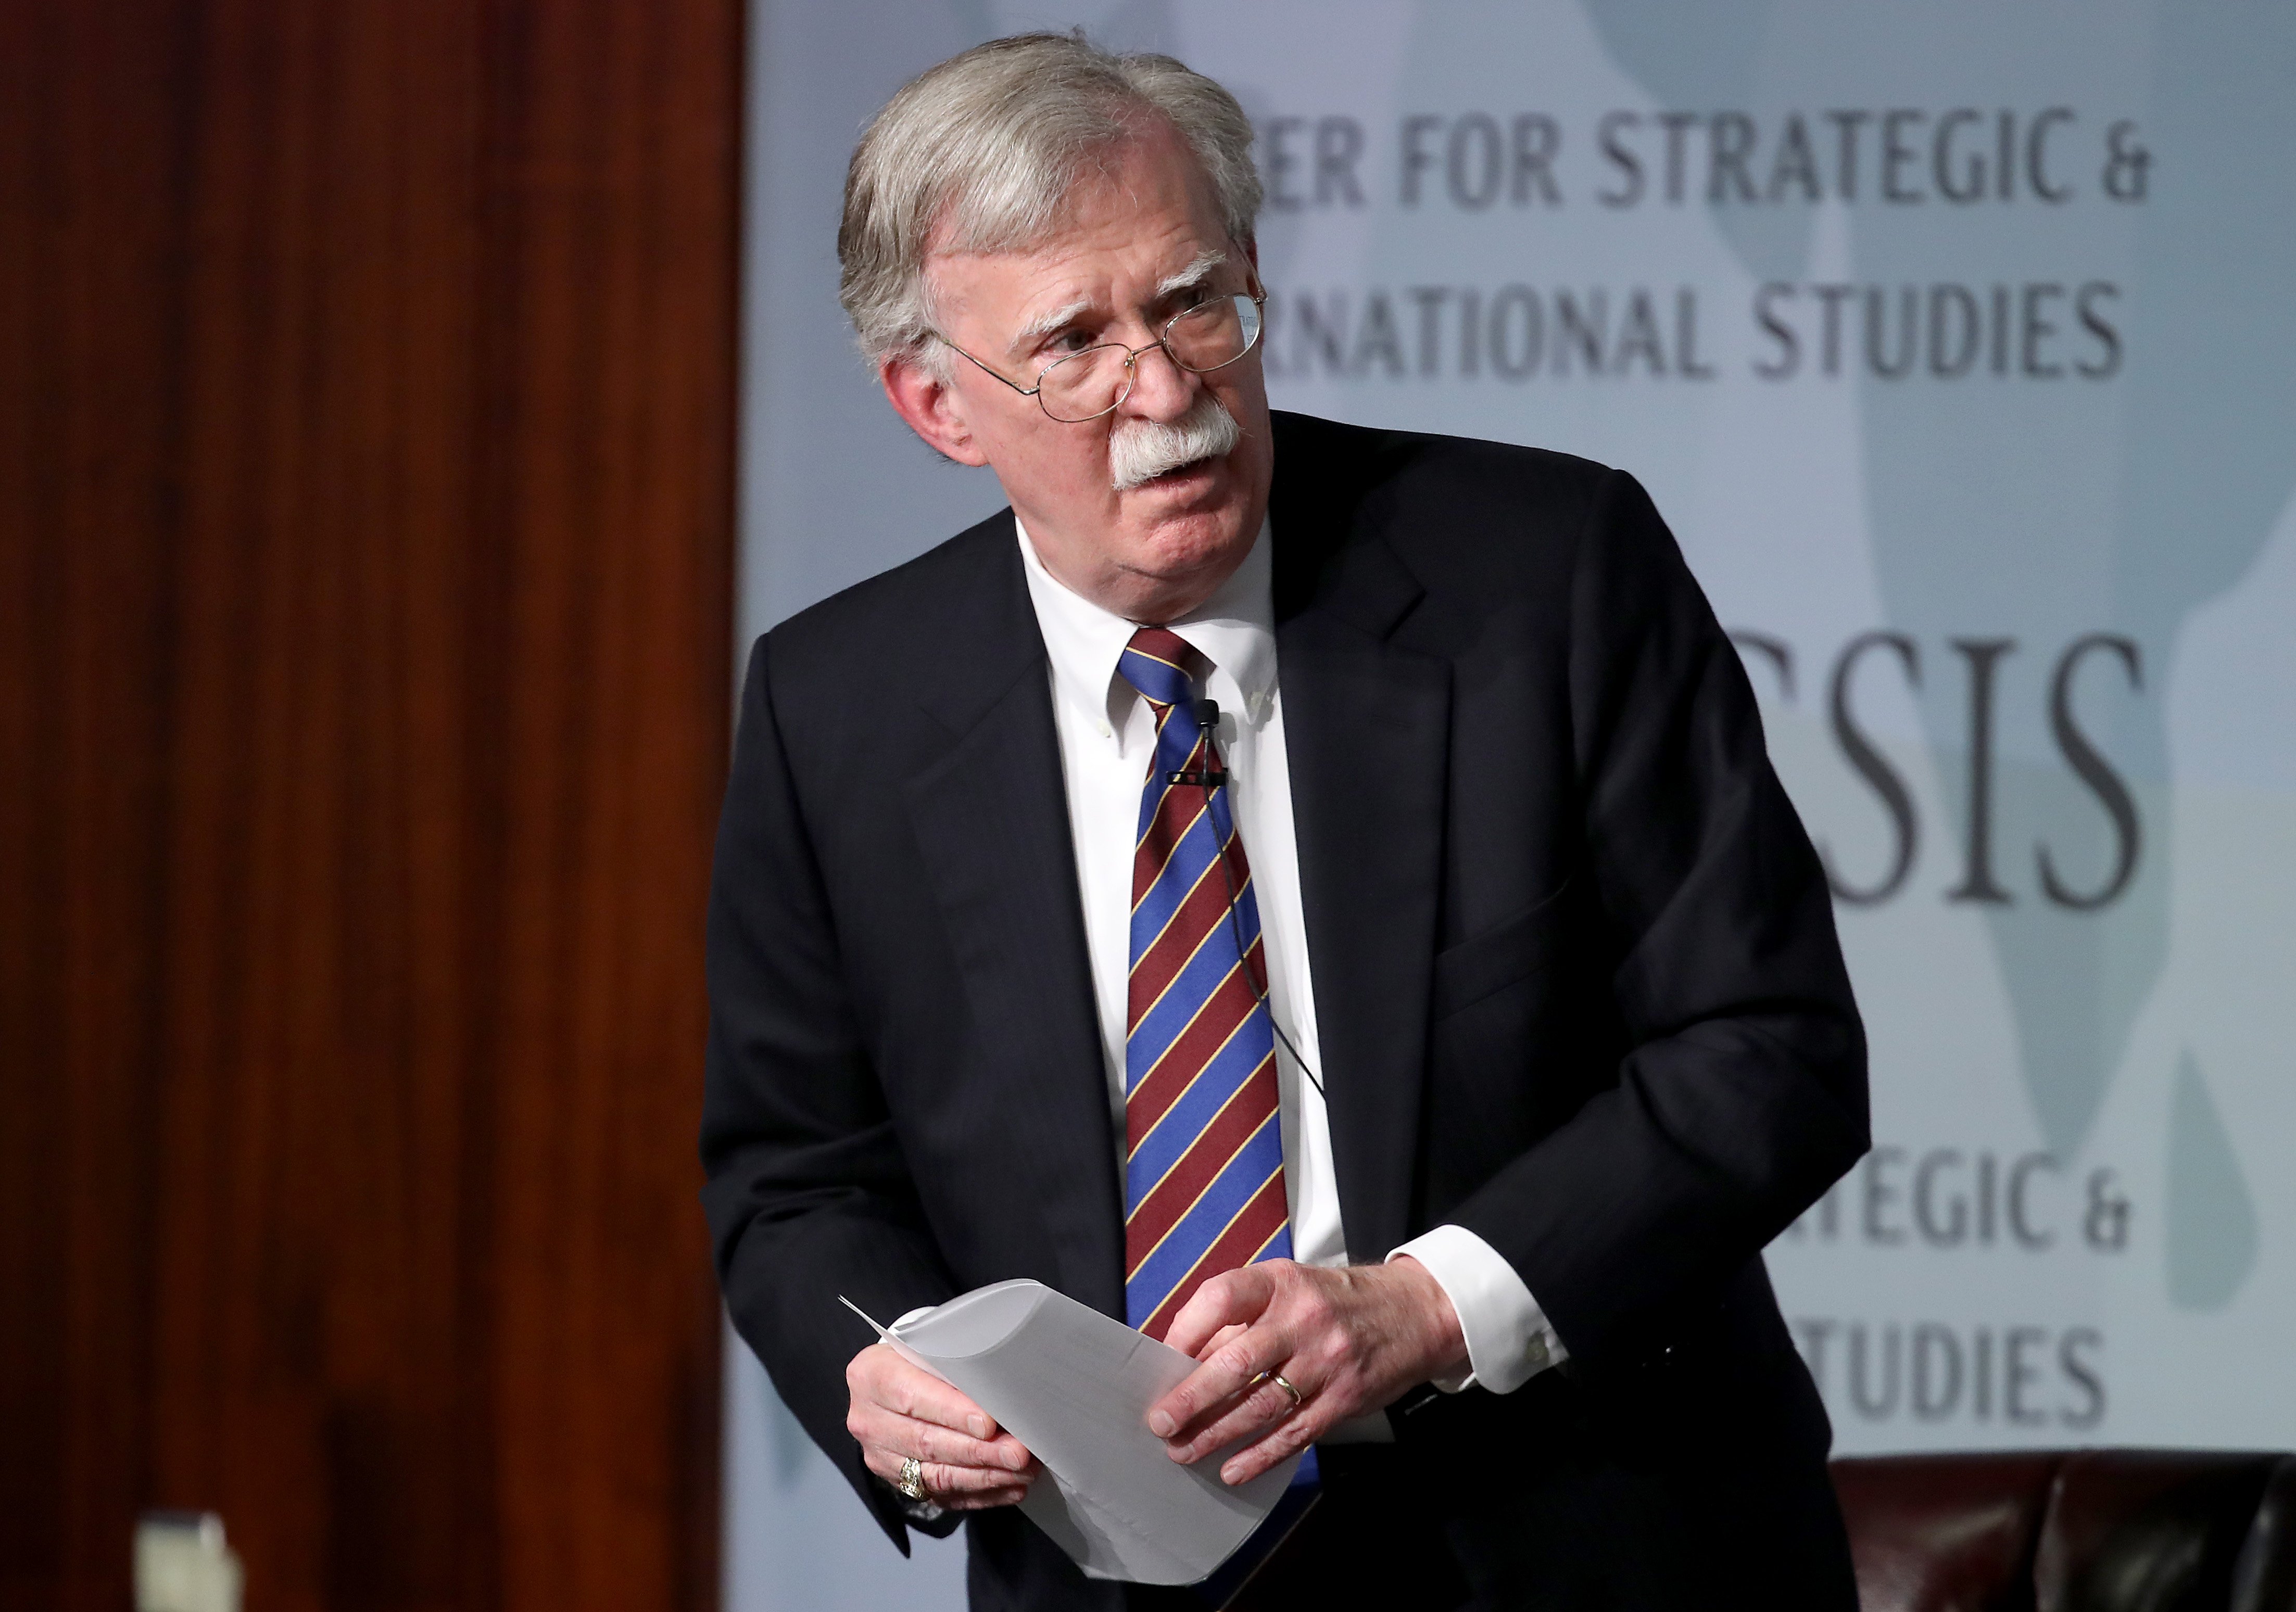 Former U.S. National Security Advisor John Bolton appears at the Center for Strategic and International Studies before delivering remarks September 30, 2019 in Washington, DC. (Win McNamee/Getty Images)